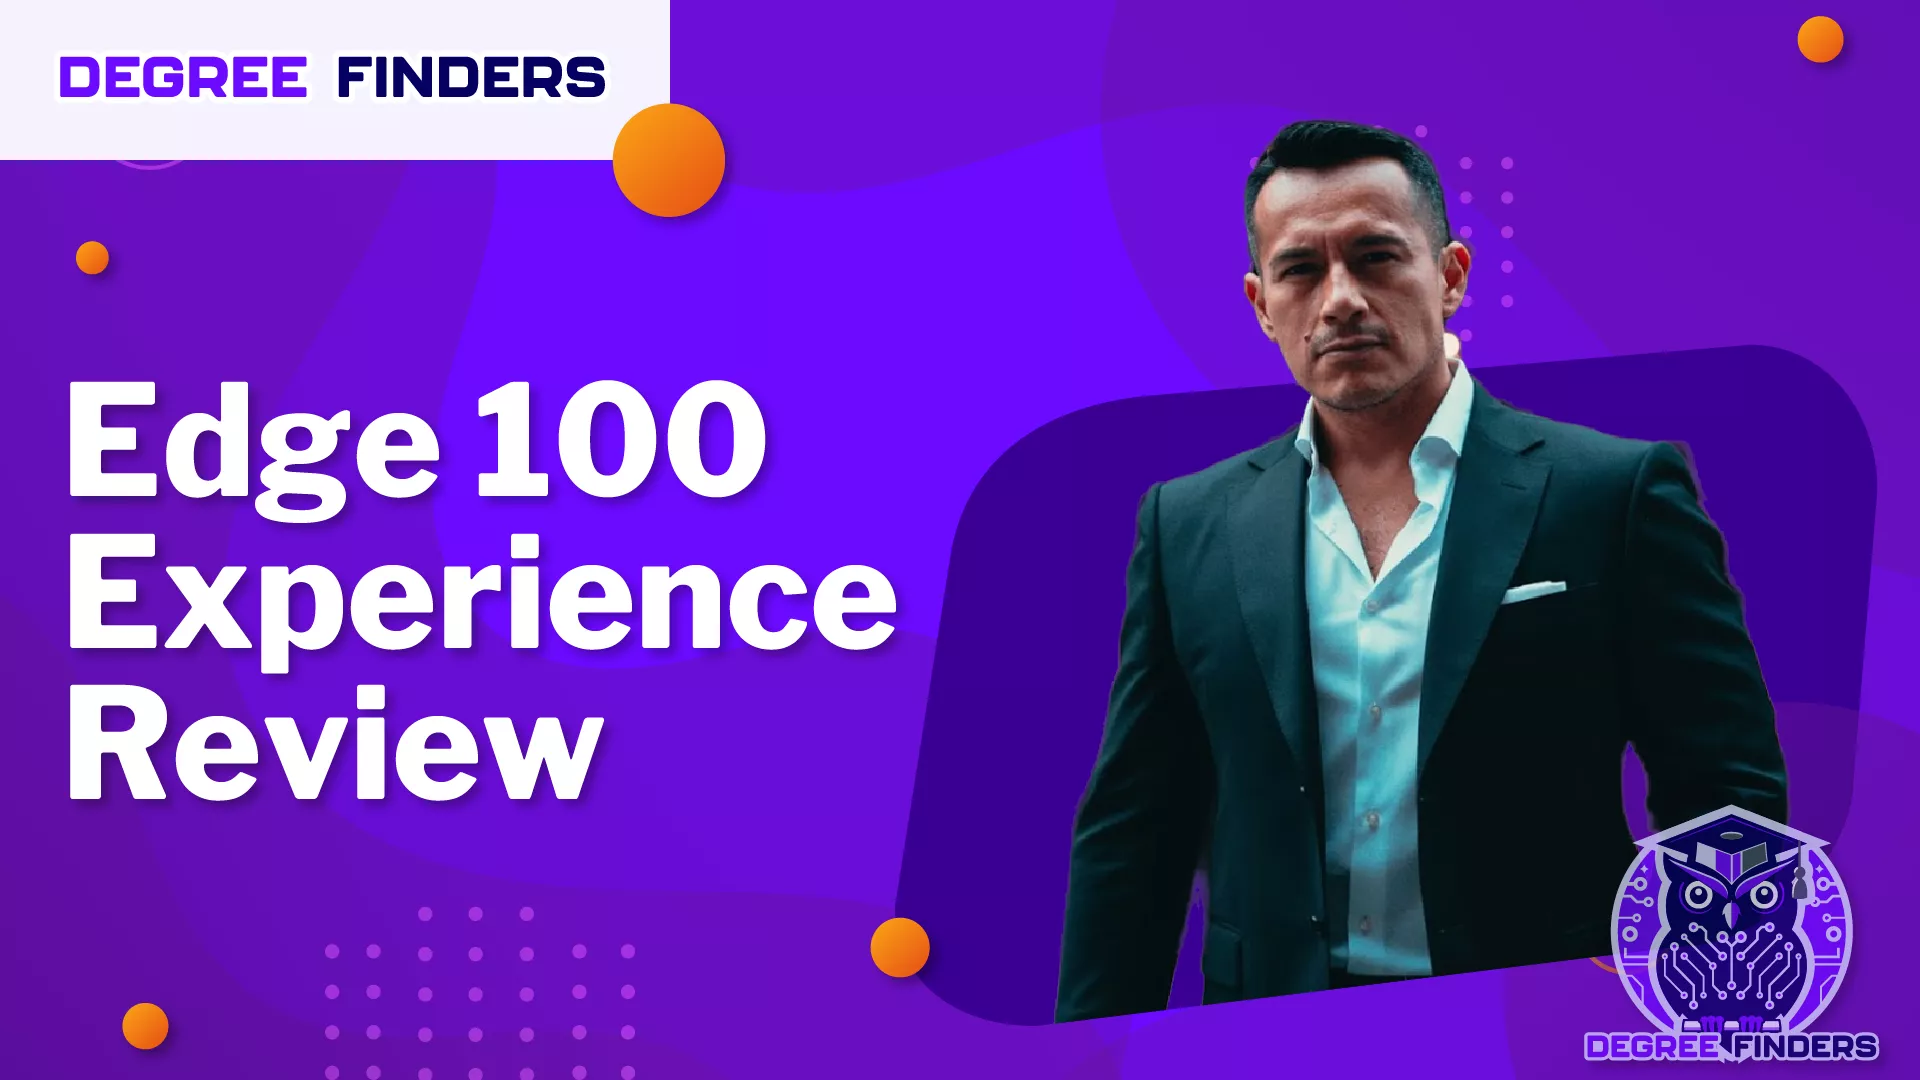 Edge 100 Experience Review